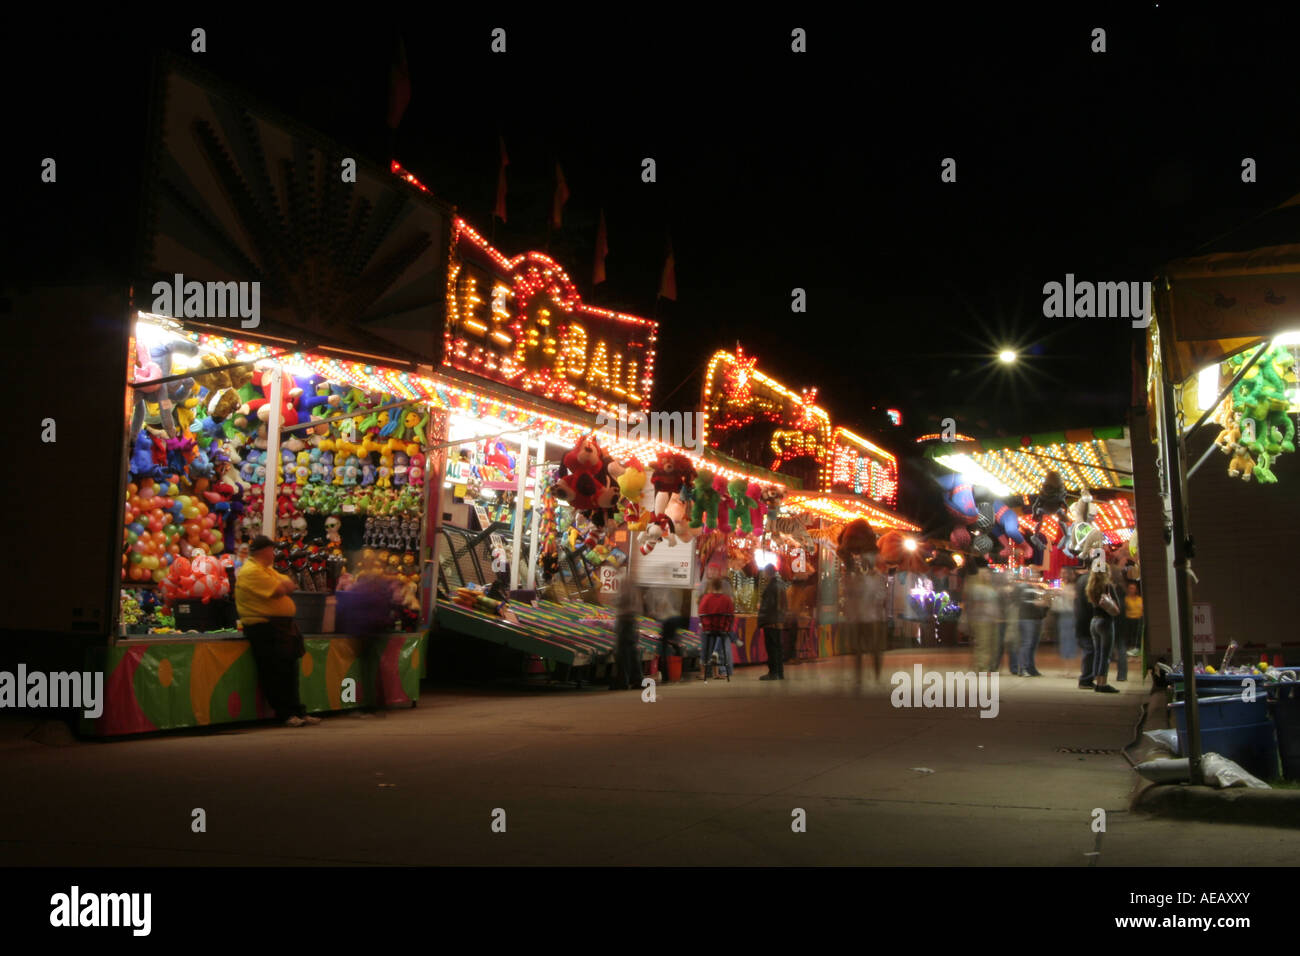 Festival games at night Stock Photo